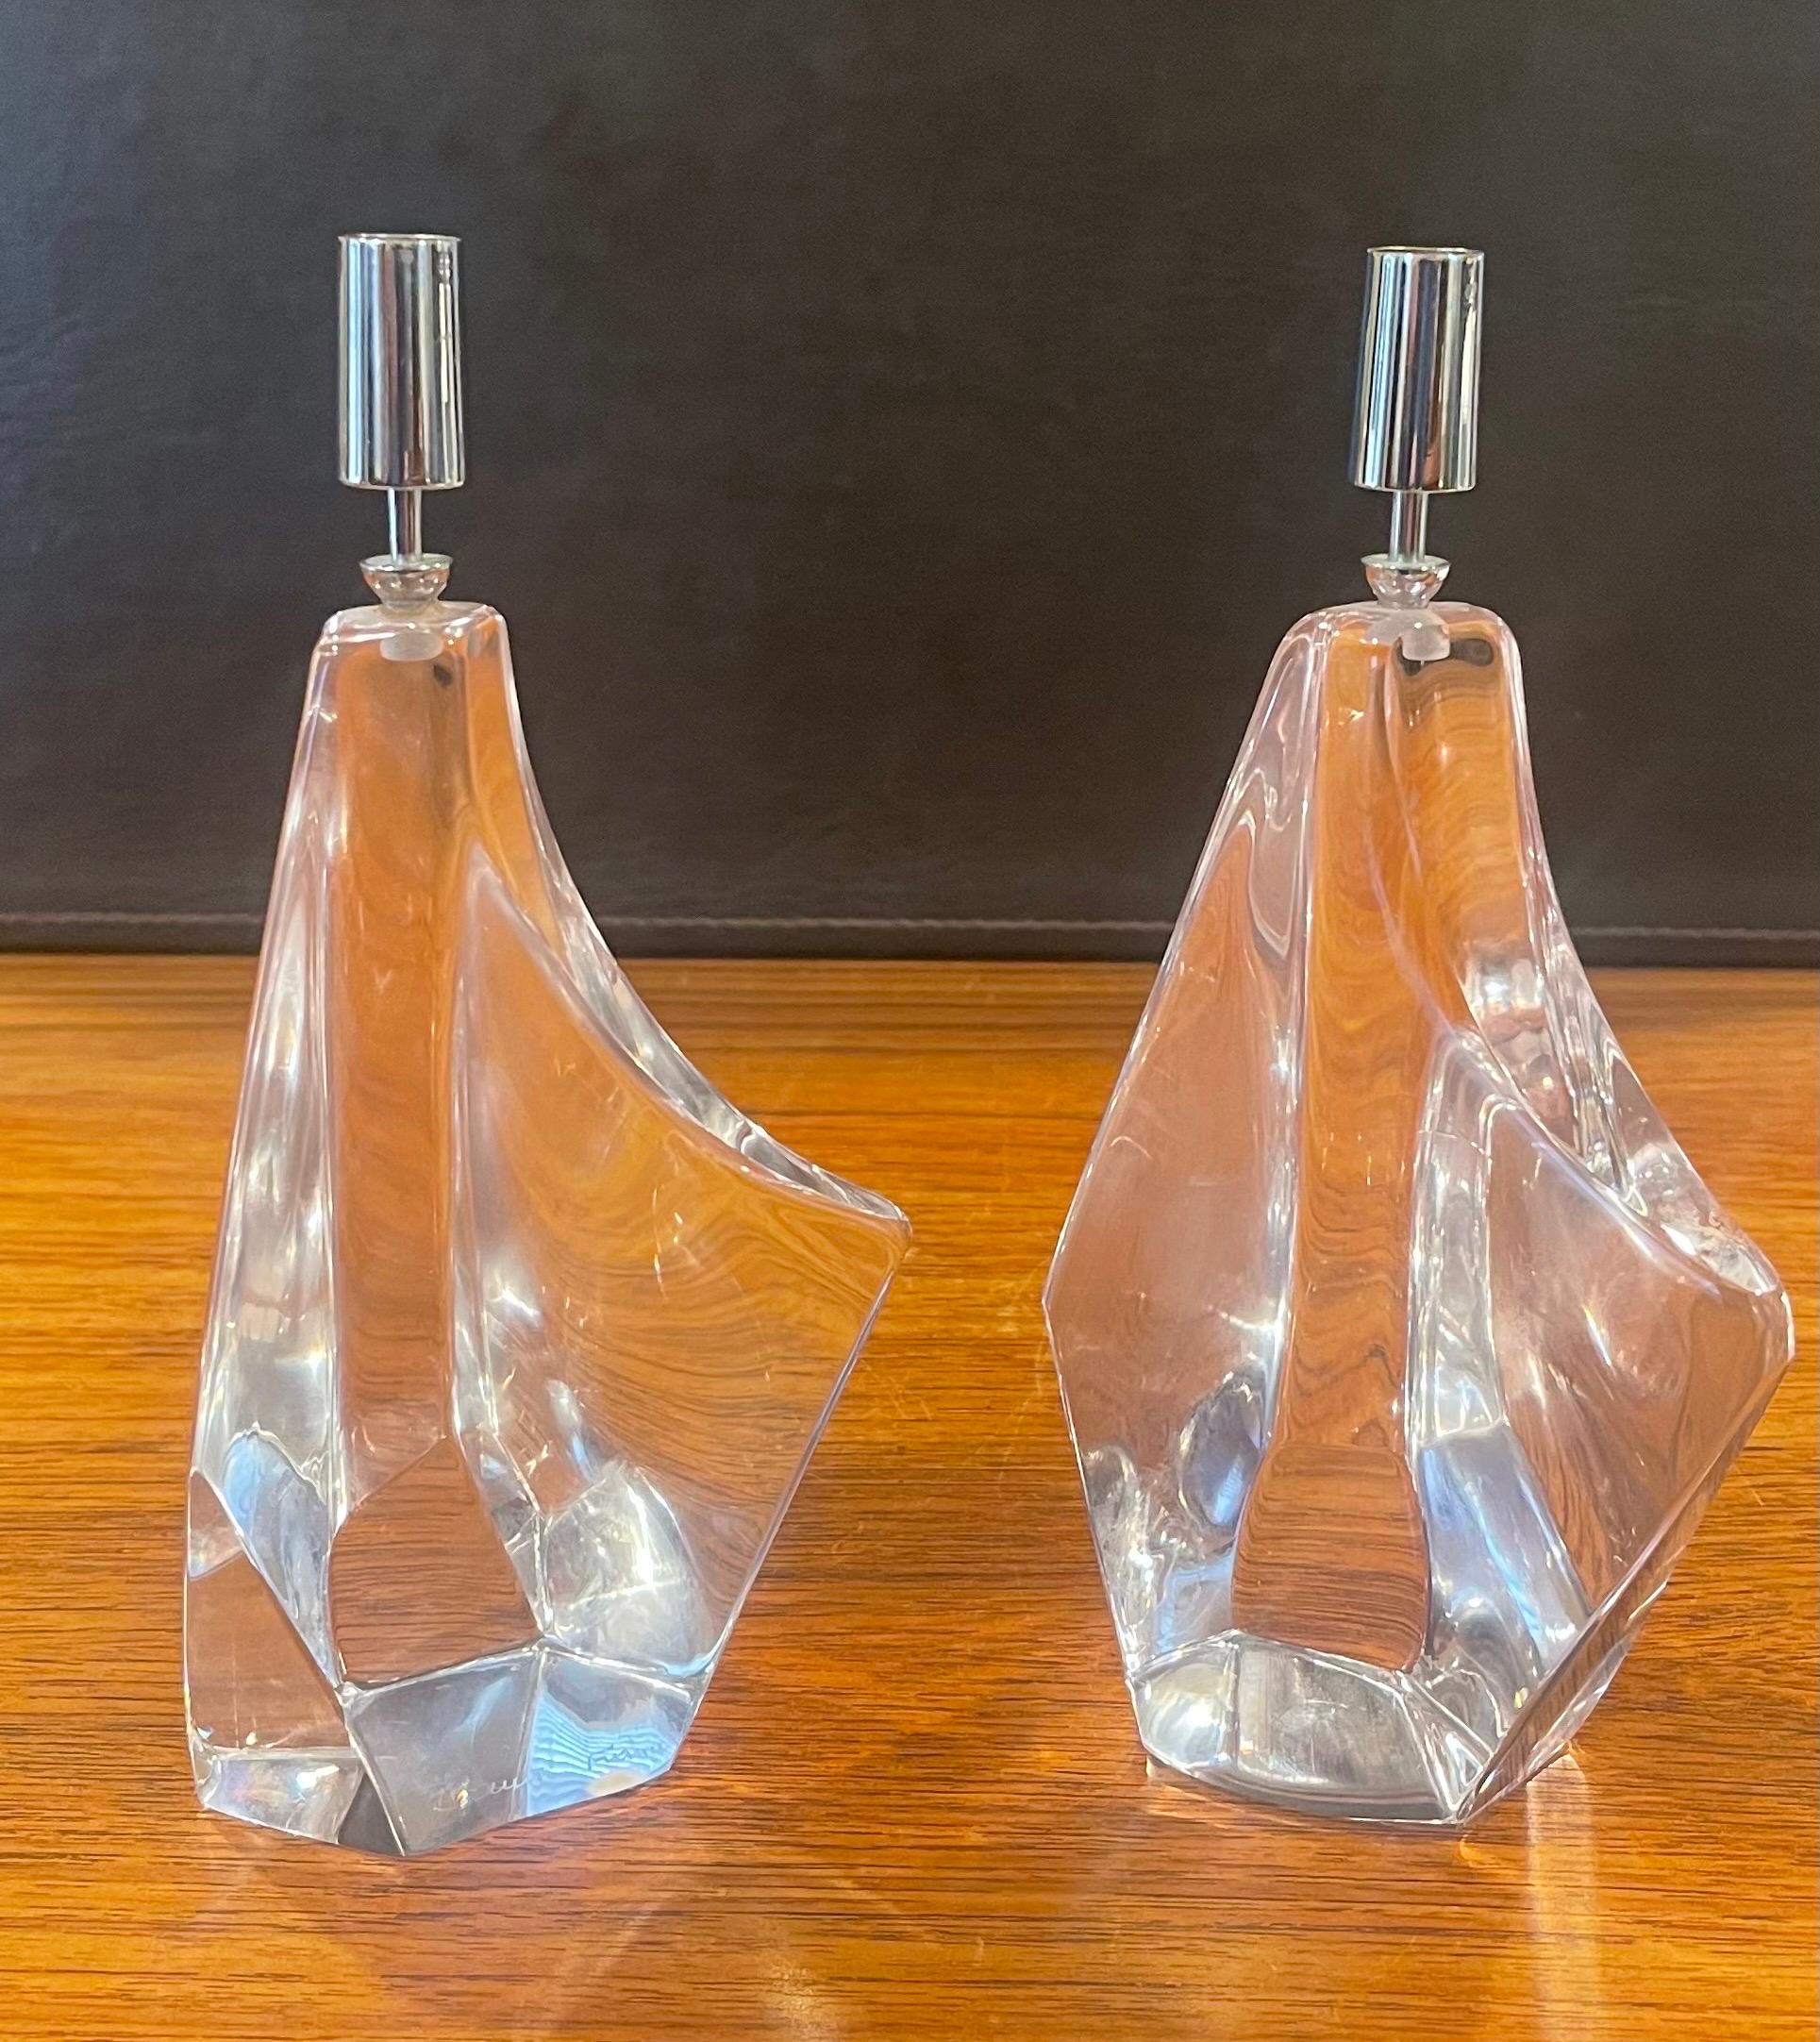 A very cool and rare pair of stylized crystal iceberg candlesticks by Daum France, circa 1960s. The pair of freeform crystal blocks with chrome candleholders are in very good vintage condition with no chips or cracks. They measure 4